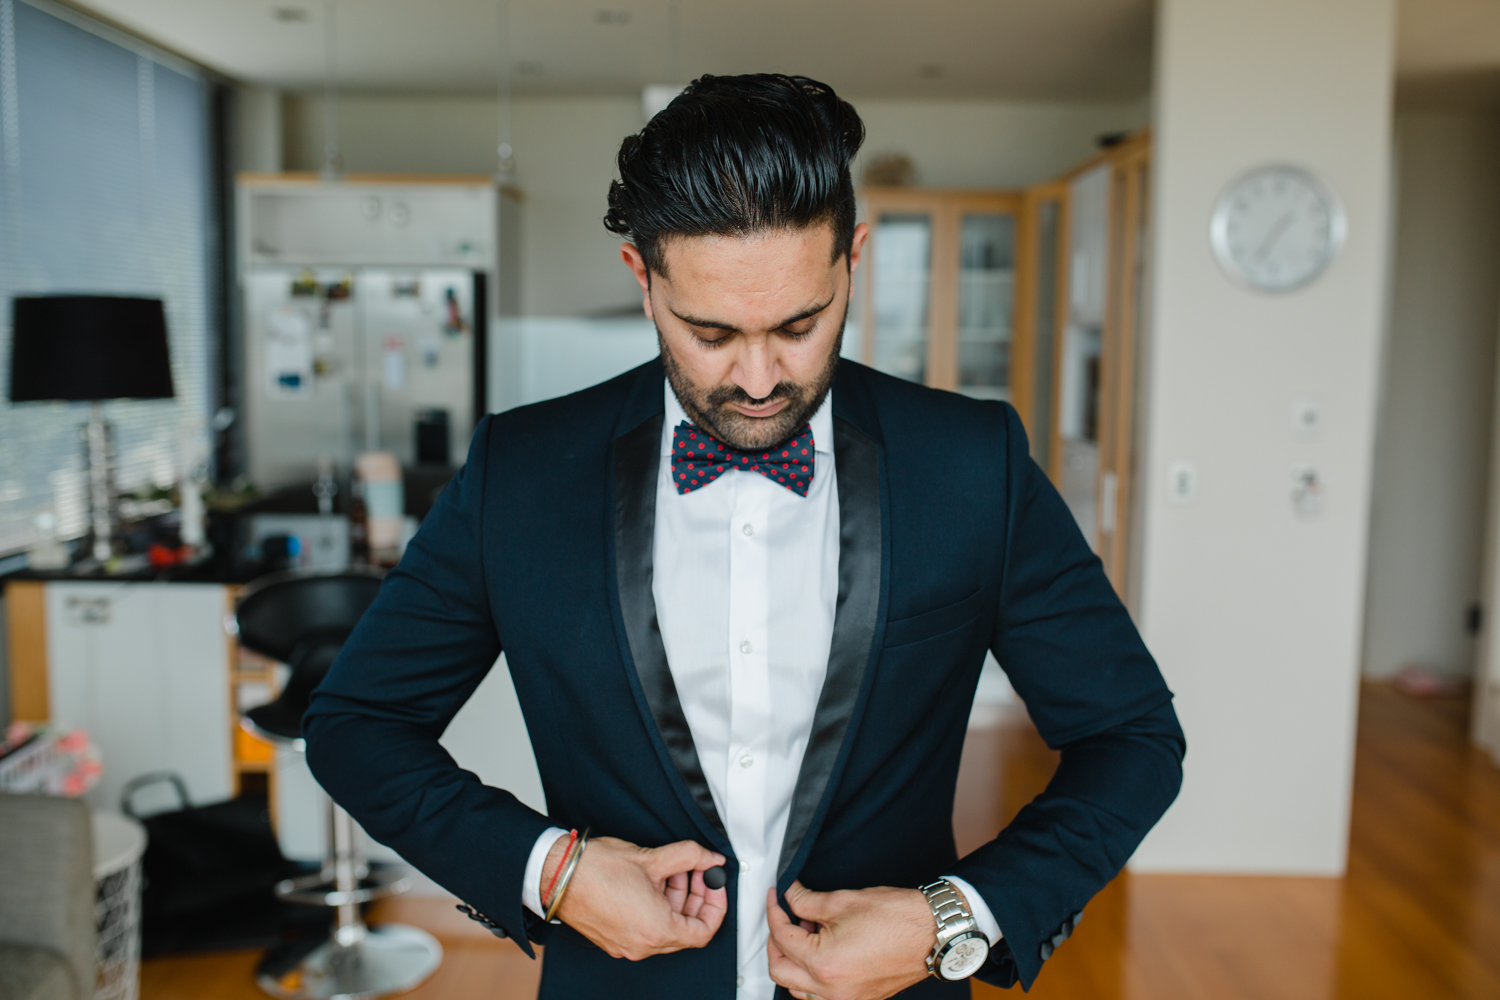 Groom getting ready for his wedding. This image was taken by Mala Photography, an Auckland based wedding photographer. The wedding was at Markovina Vineyard Estate In Kumeu, Auckland